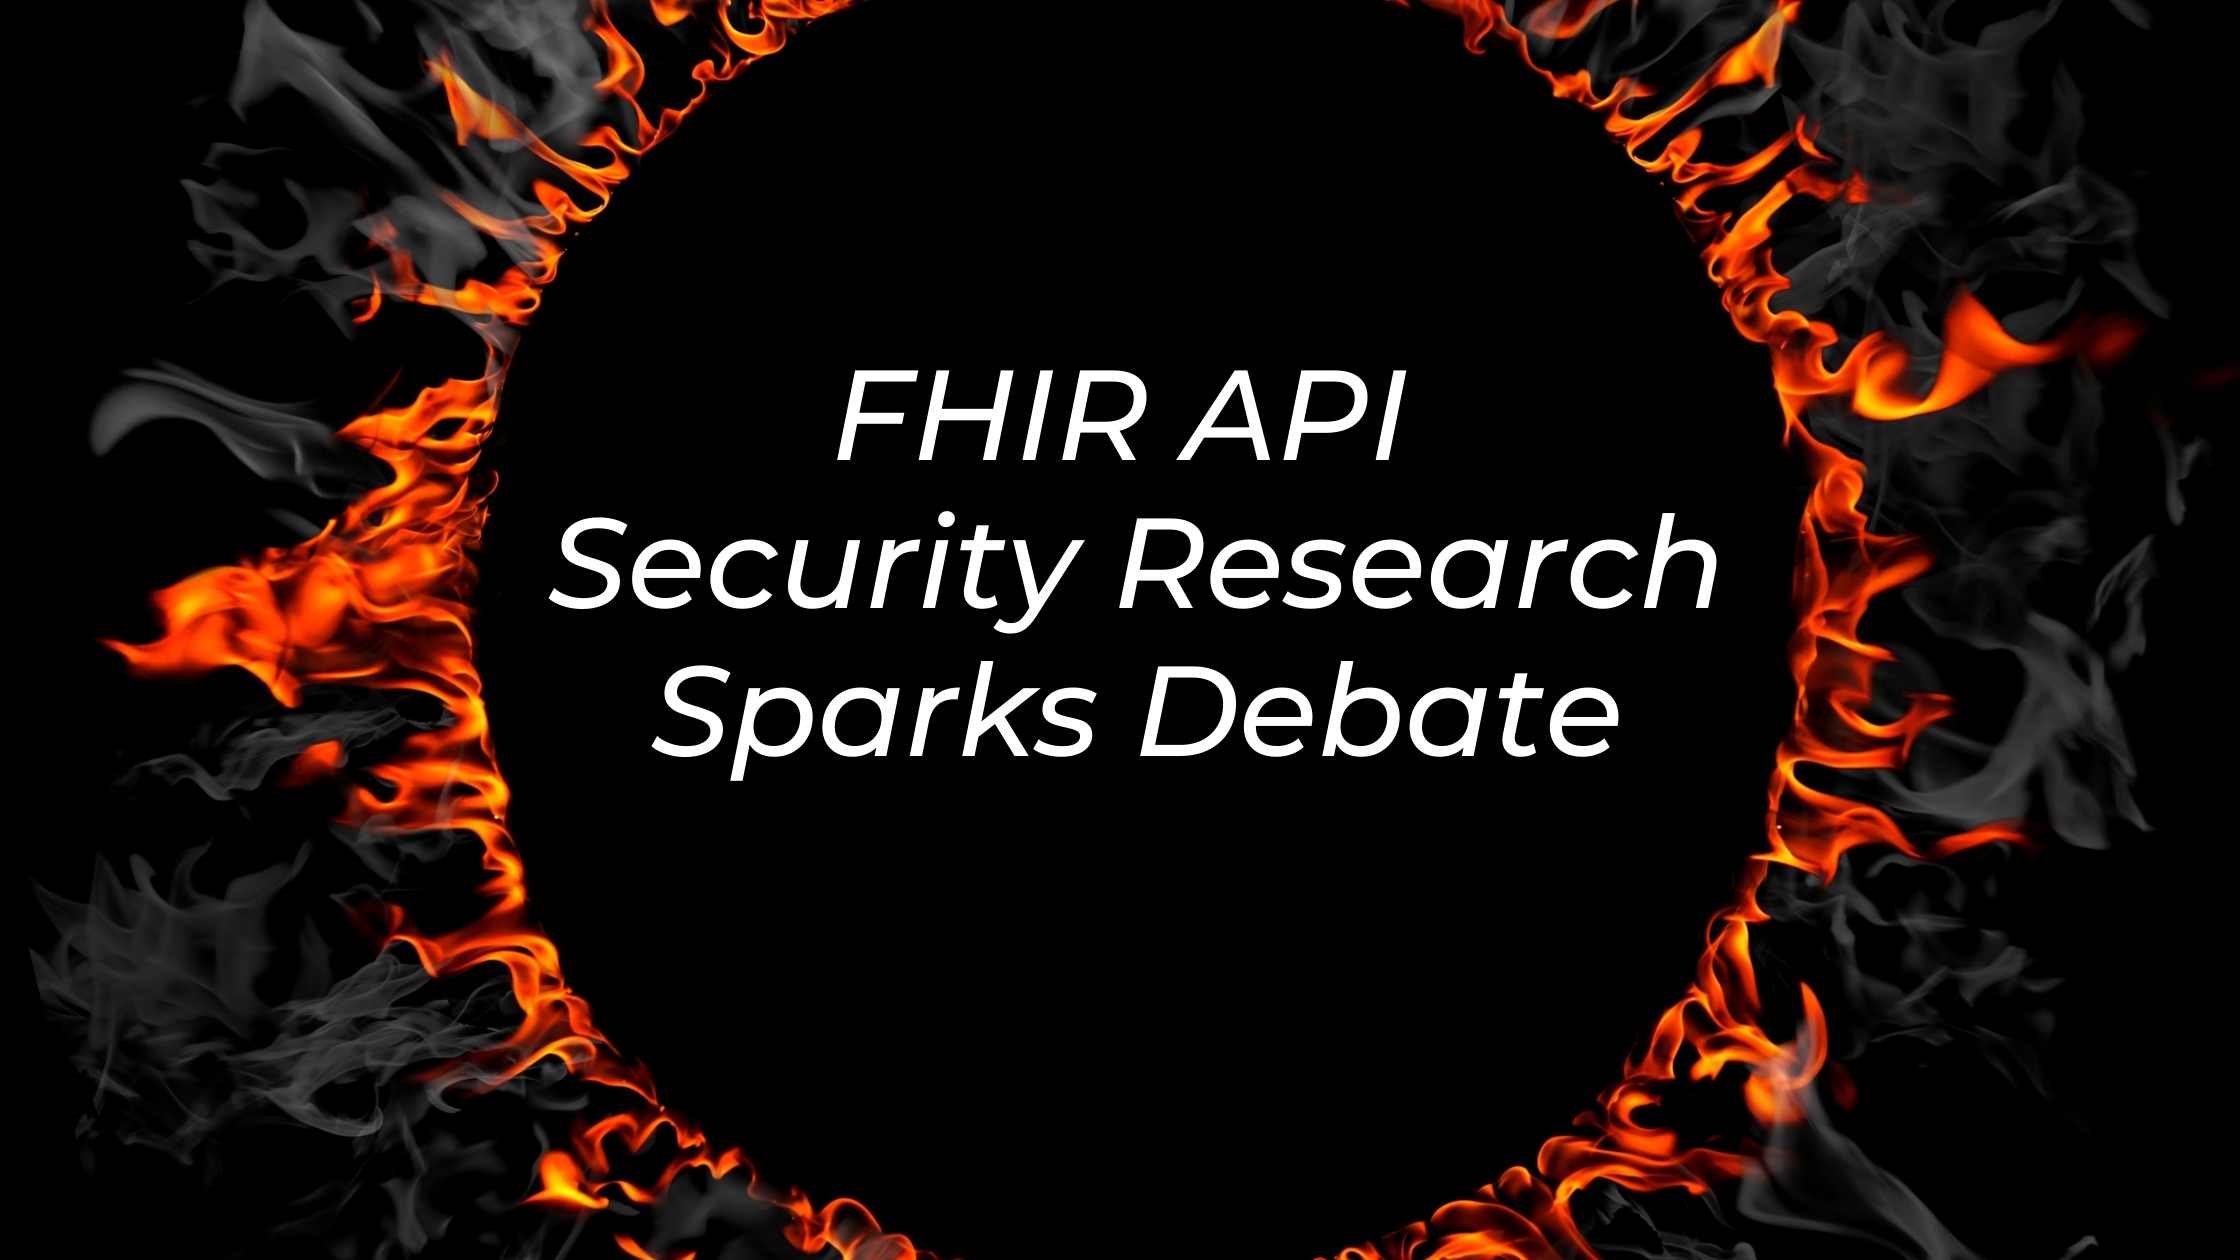 FHIR Security concept; fire ring made of smoke and flames with text 'FHIR API Security Research Sparks Debate'